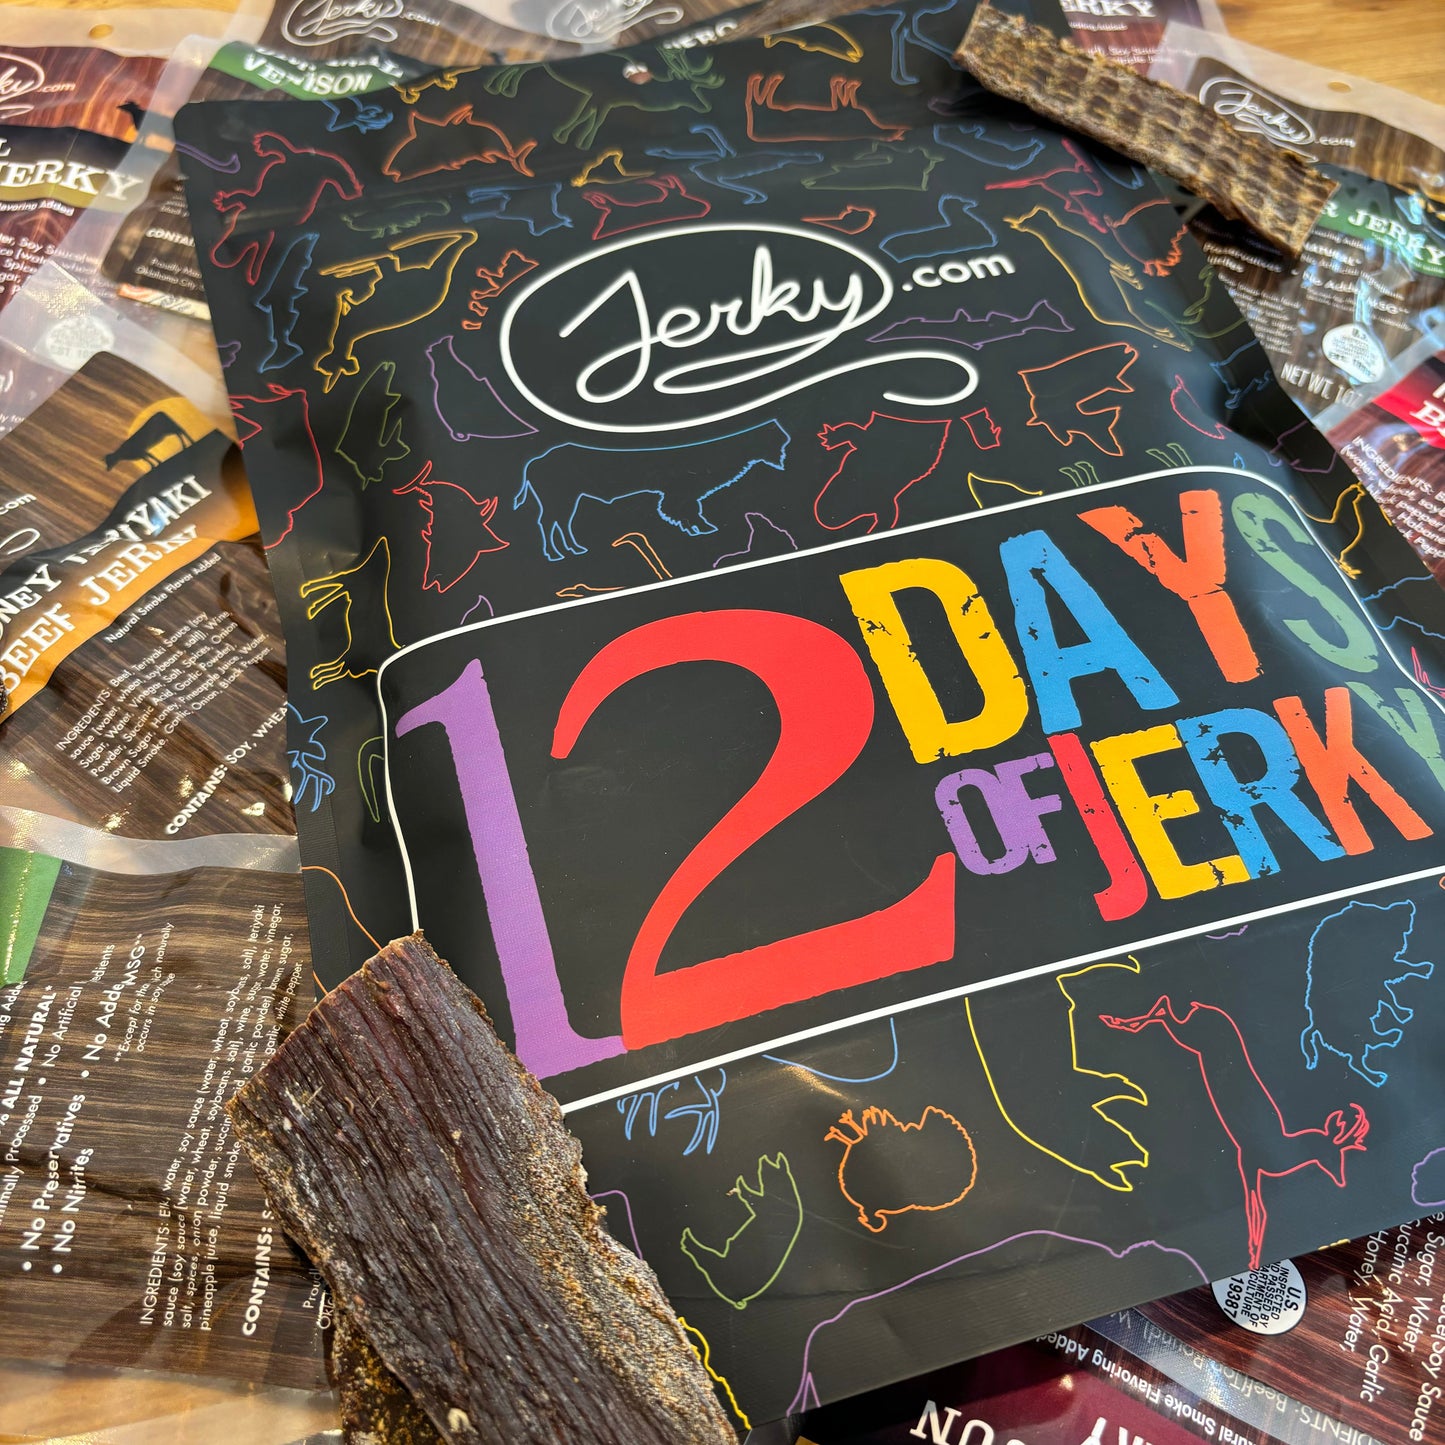 The 12 Days of Jerky Gift Package by Jerky.com